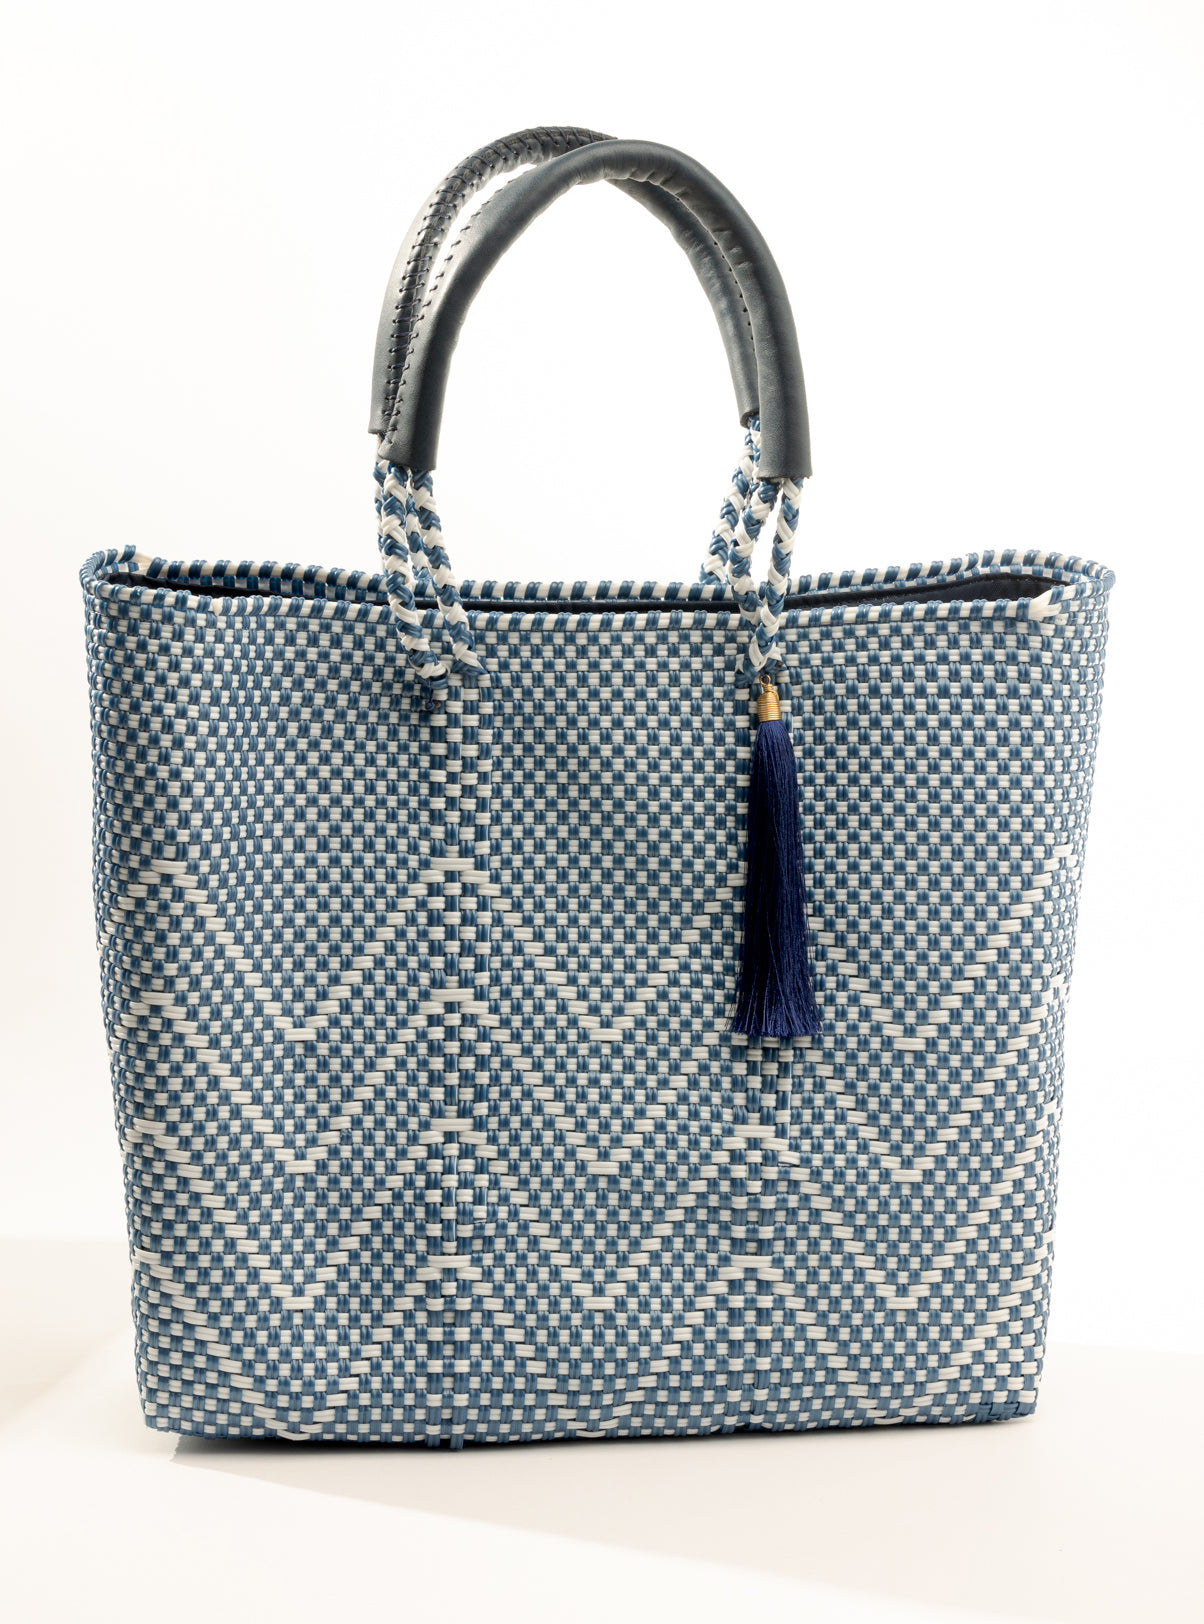 Blue and white chevron woven bucket bag made from recycled plastics featuring navy blue leather handles and tassel detail